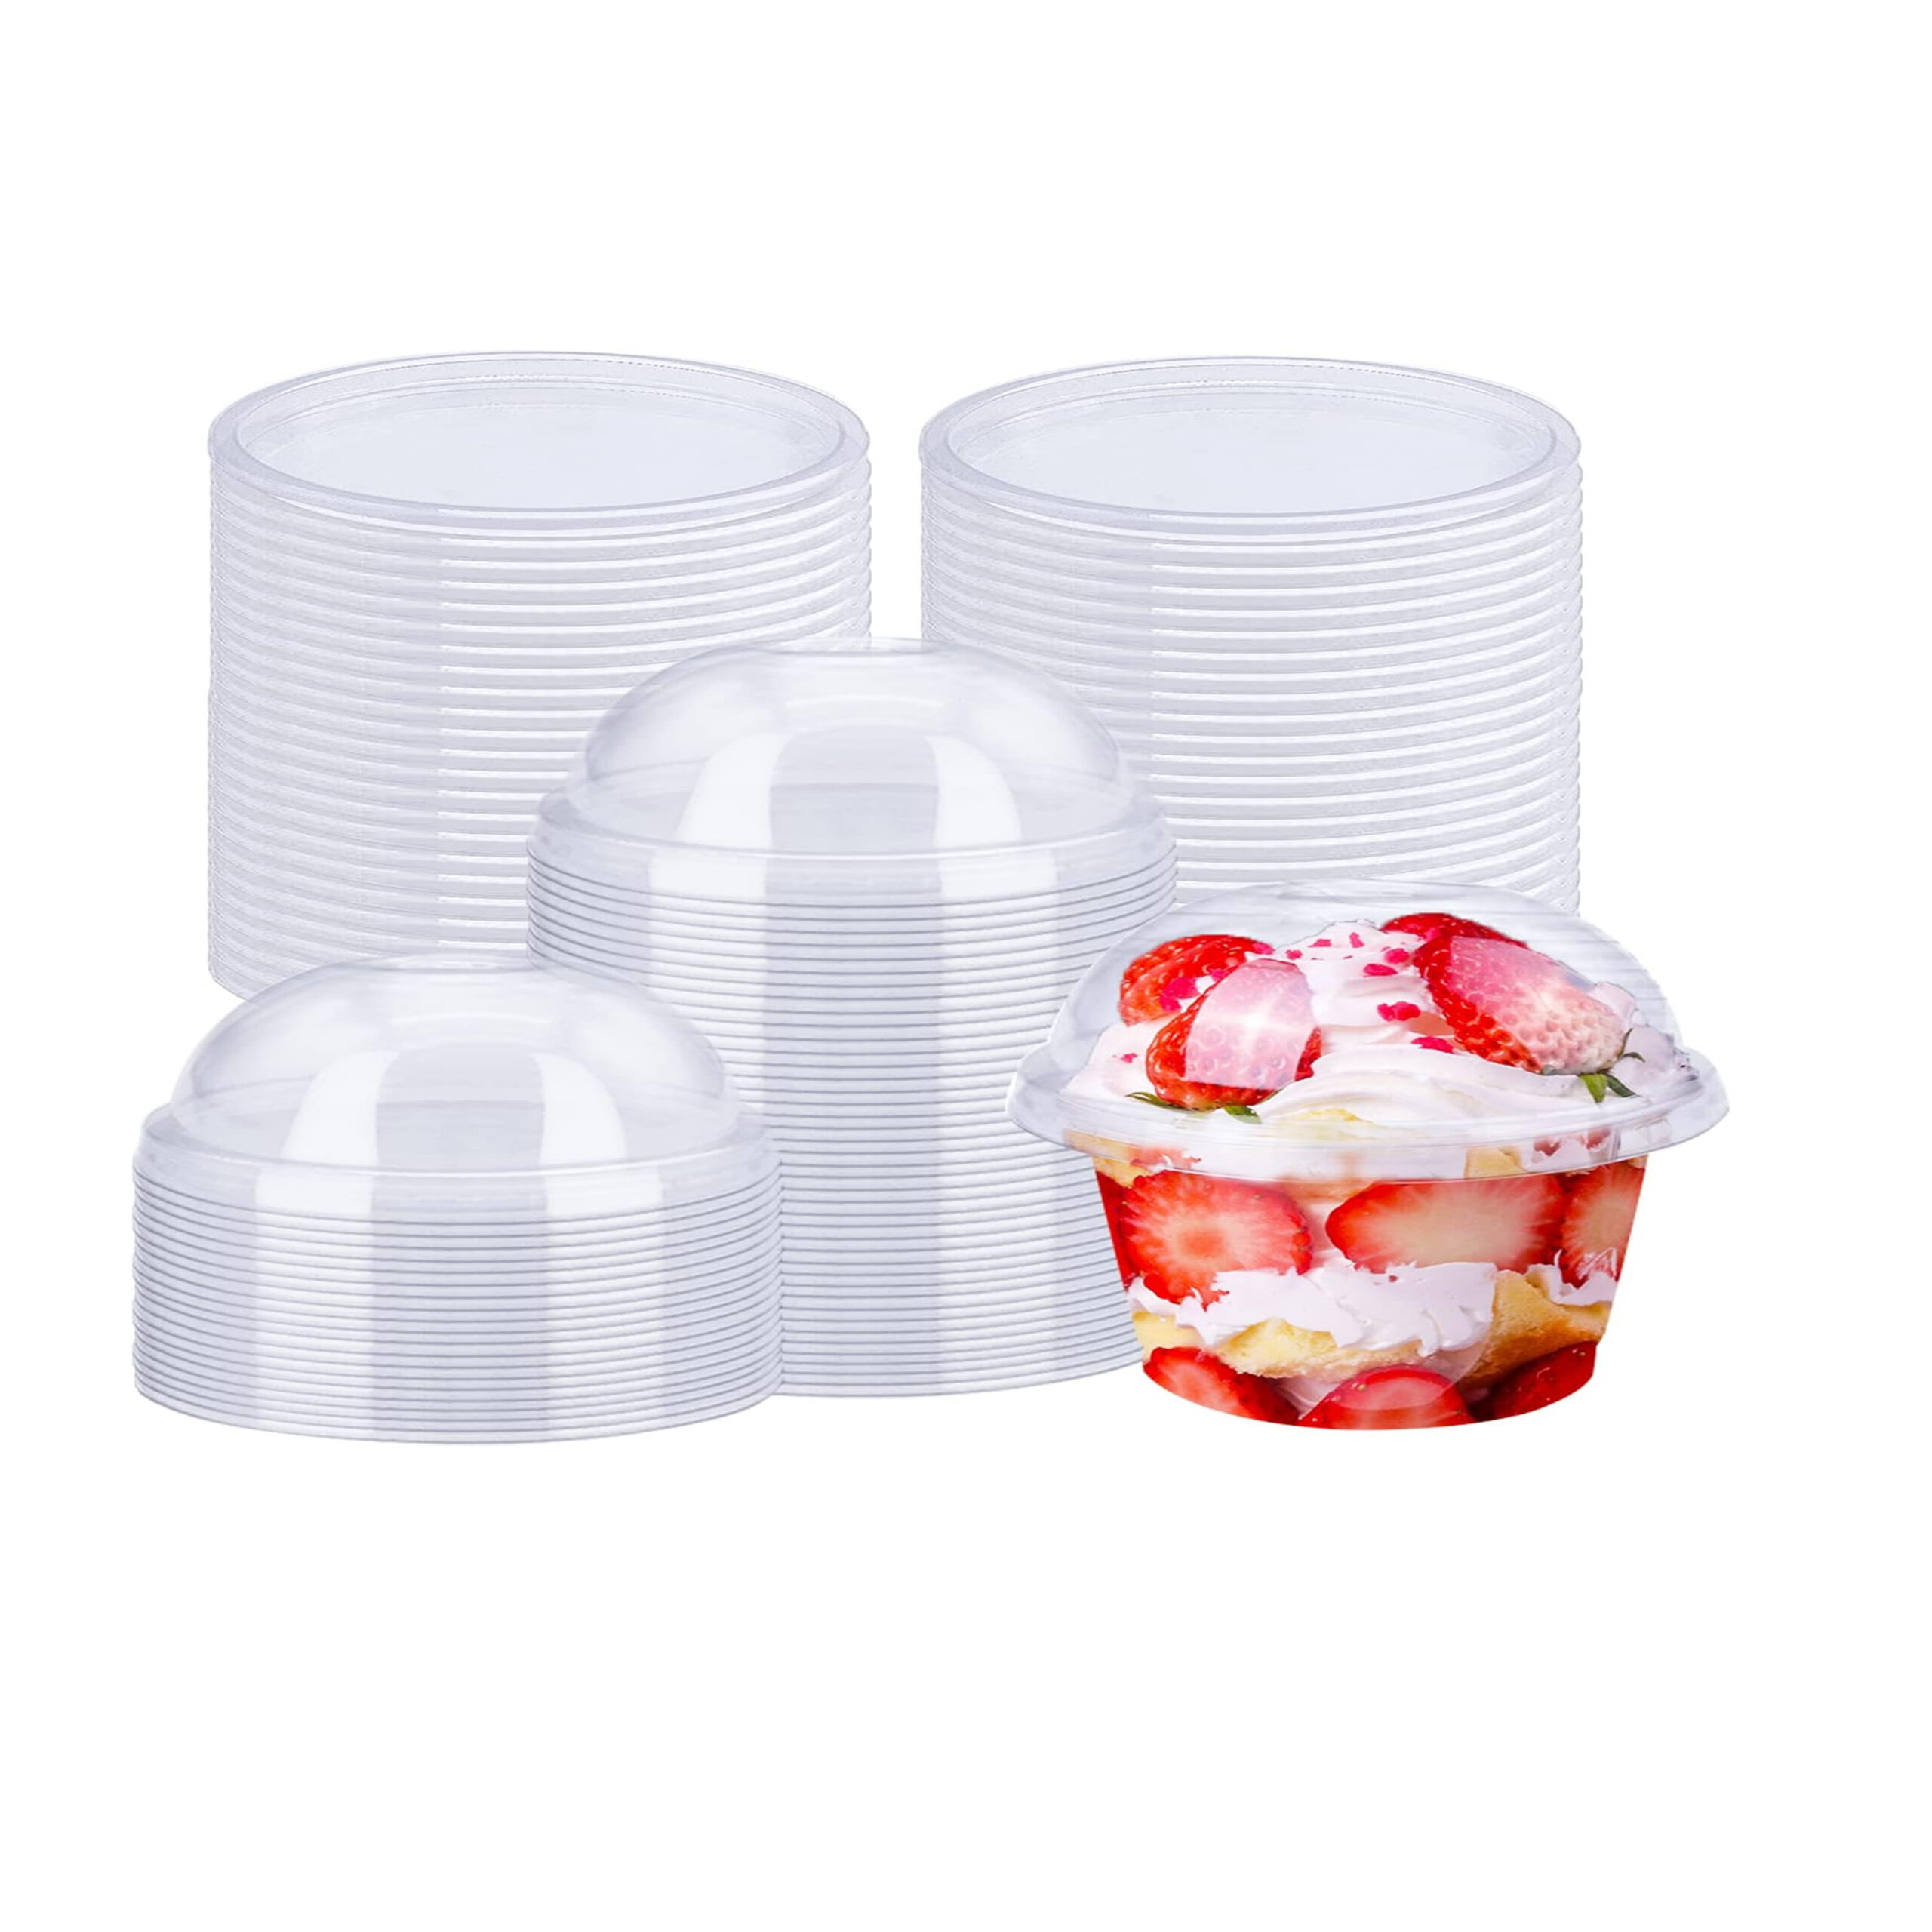 ACRYLIC DESSERT
CONTAINER
ROUND WITH
DOME LID 88x43mm
(1x10)